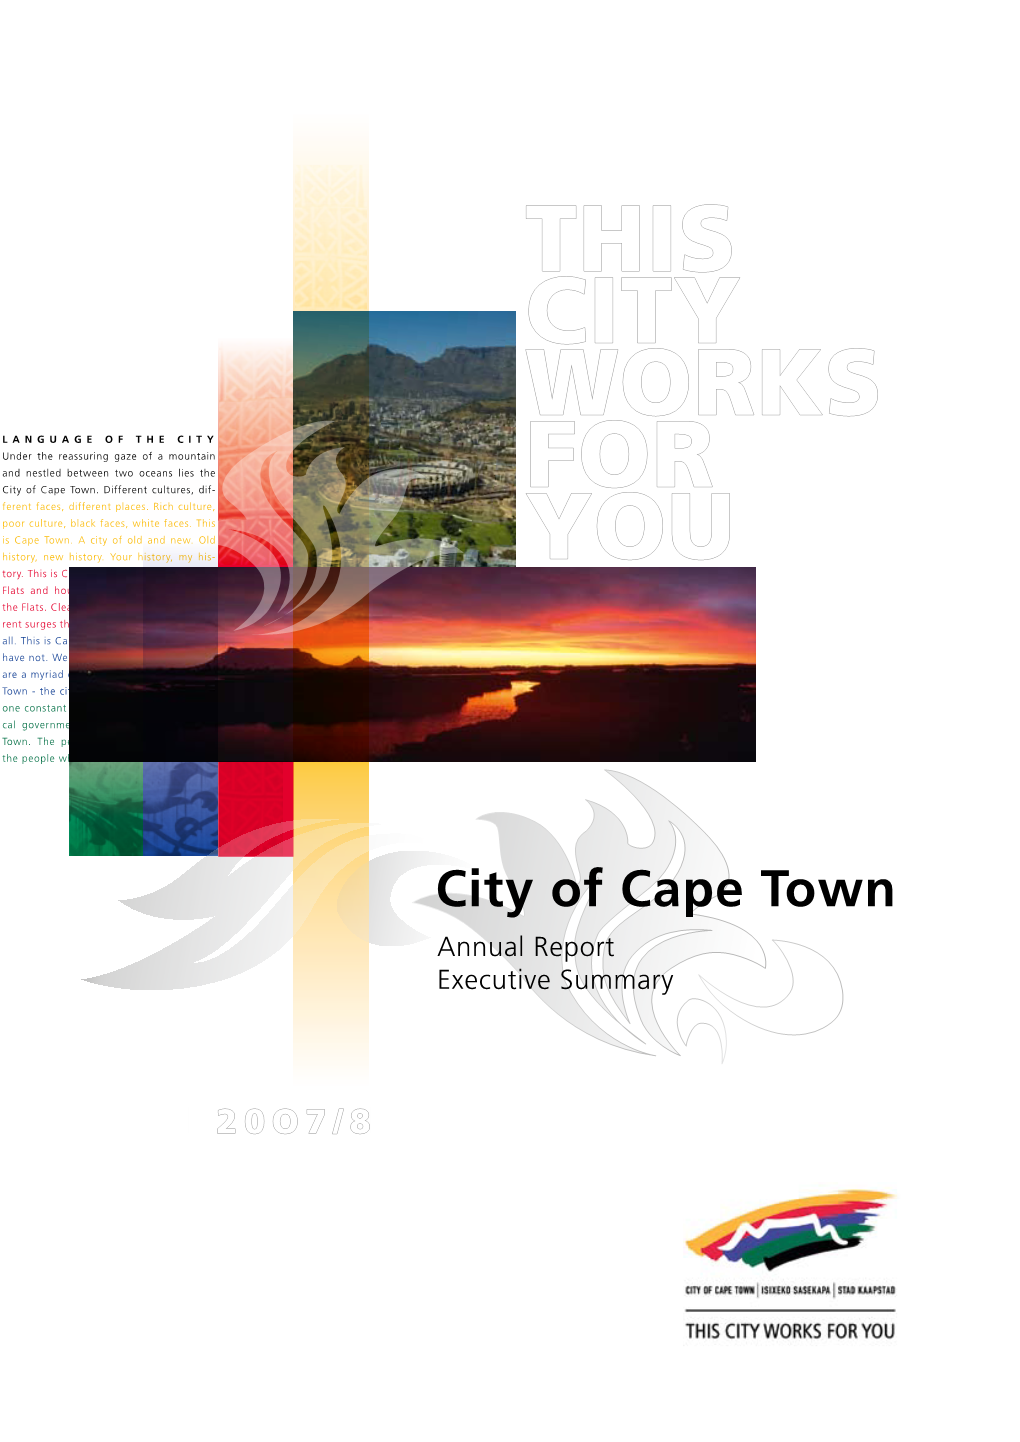 02. WC000 Cape Town Annual Report 2007-08 Executive Summary